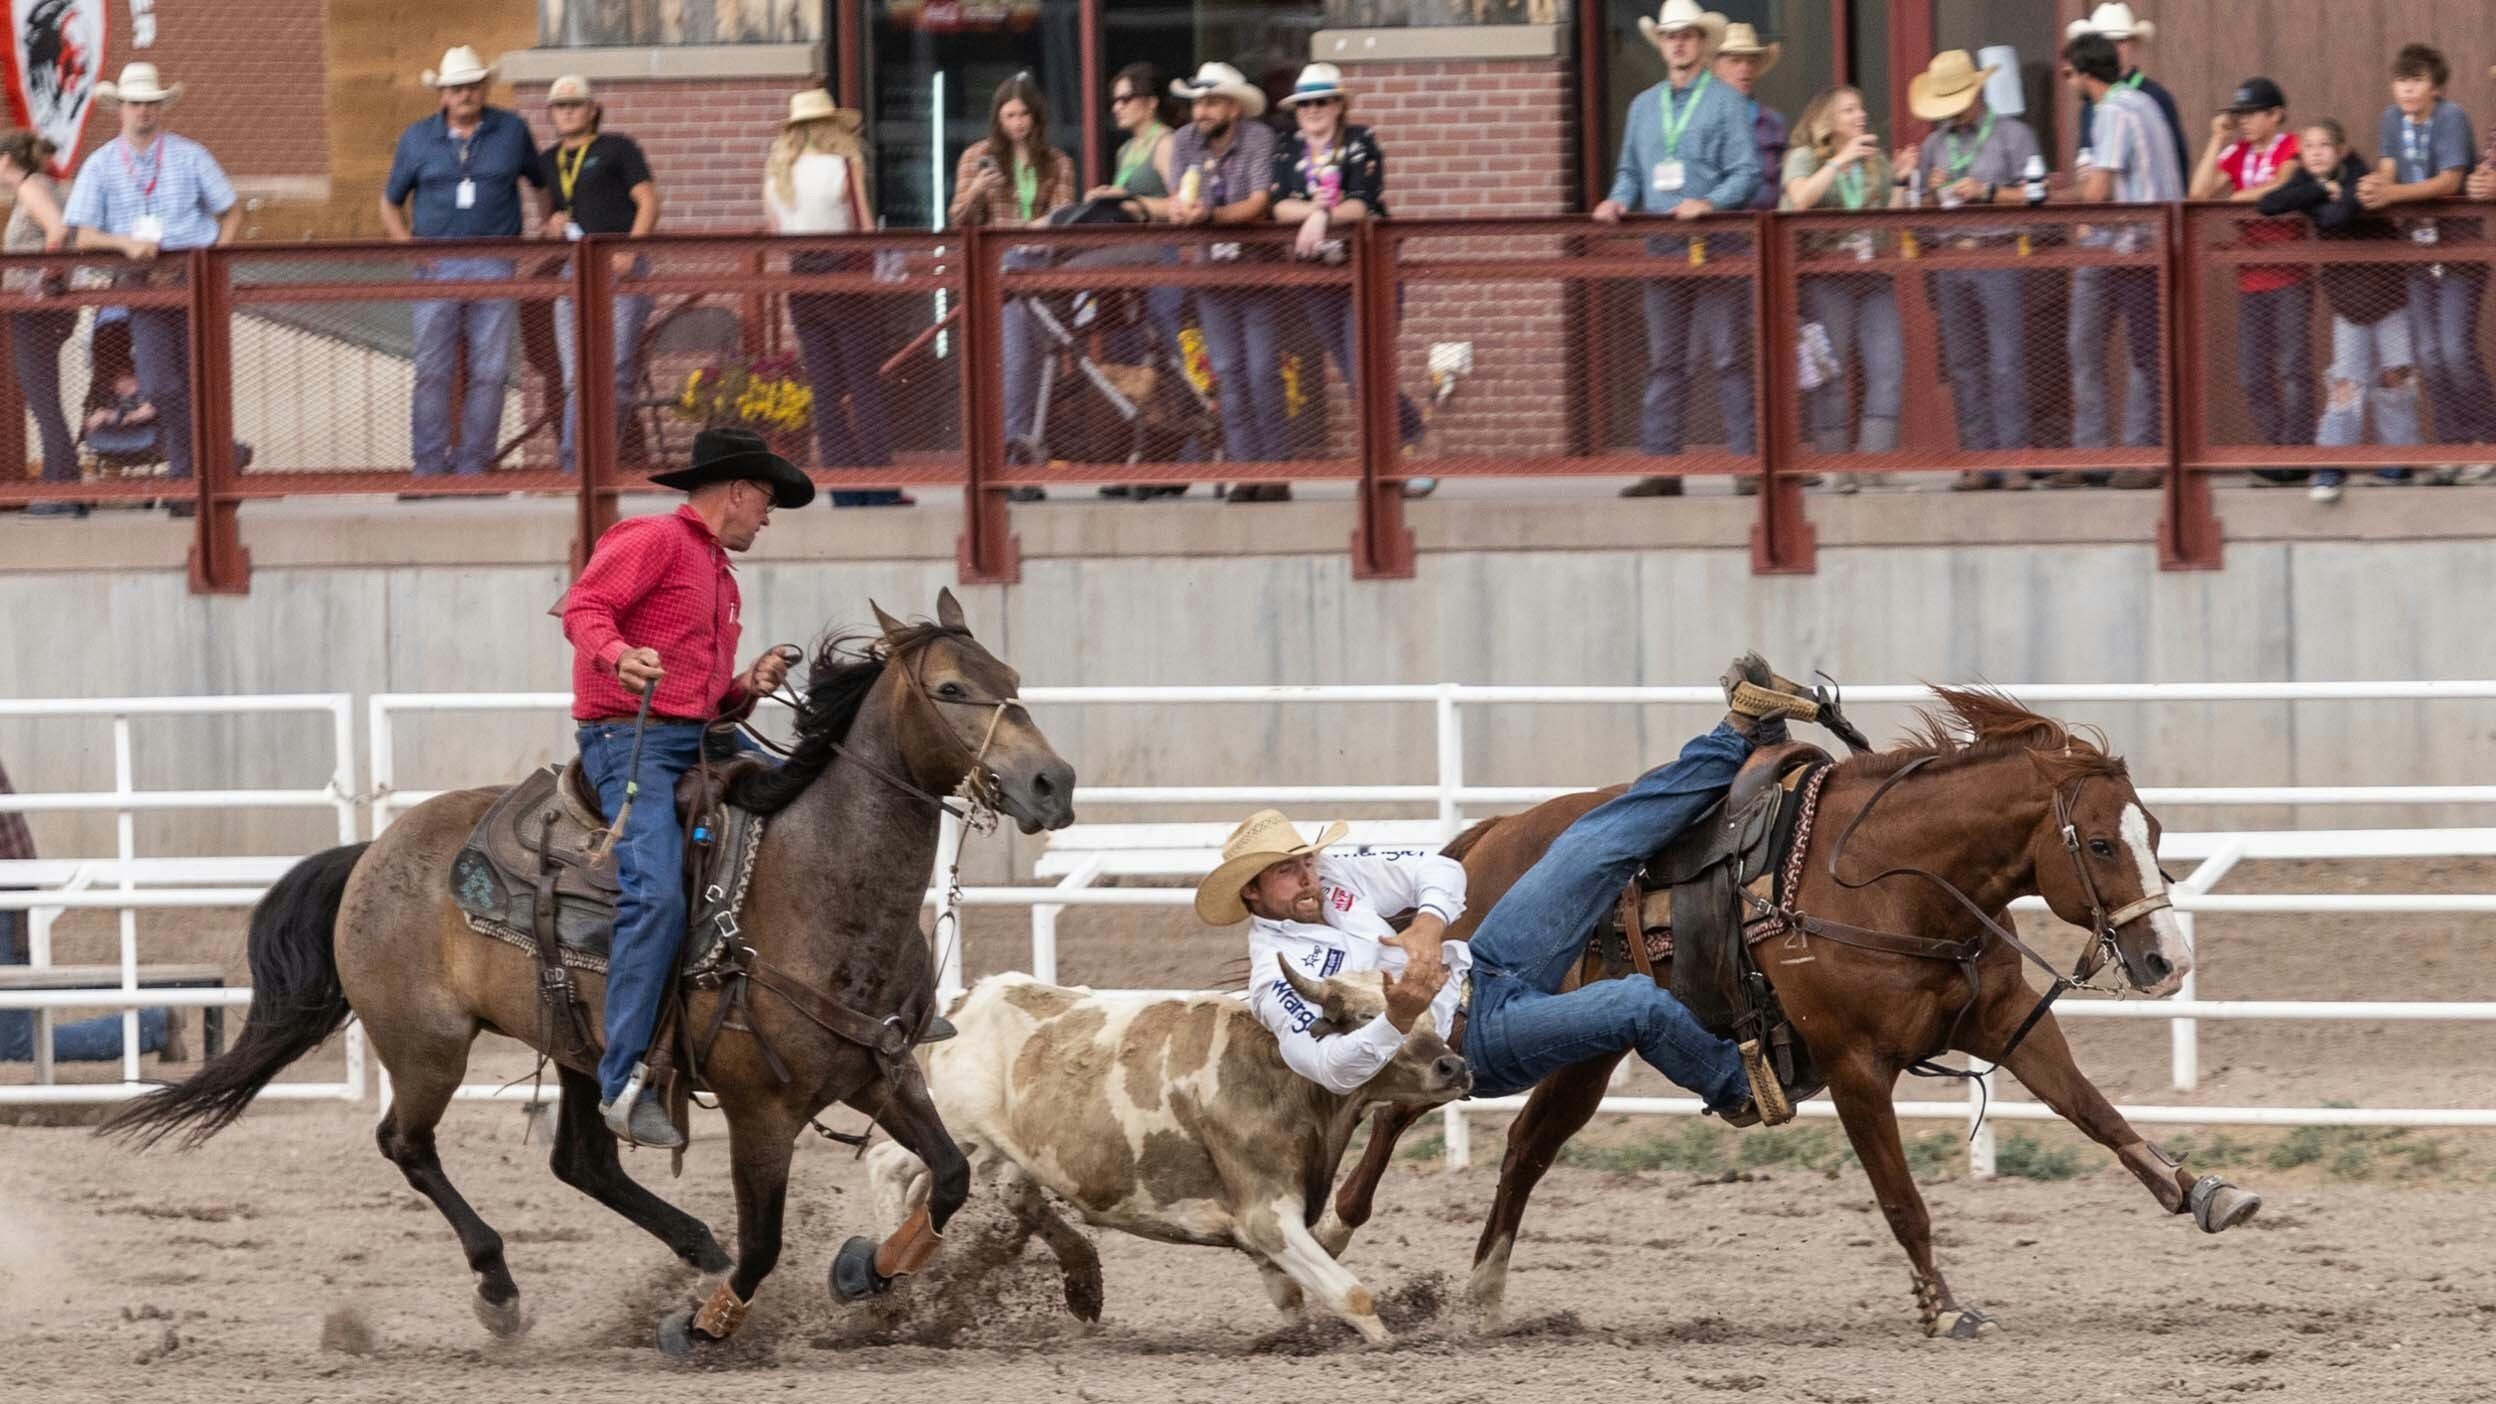 Eli Lord from Sturgis, SD dogs his steer in the Steer Wrestling for a time of 5.9 seconds to win the Cheyenne Frontier Days Steer Wrestling Championship on July 30, 2023.